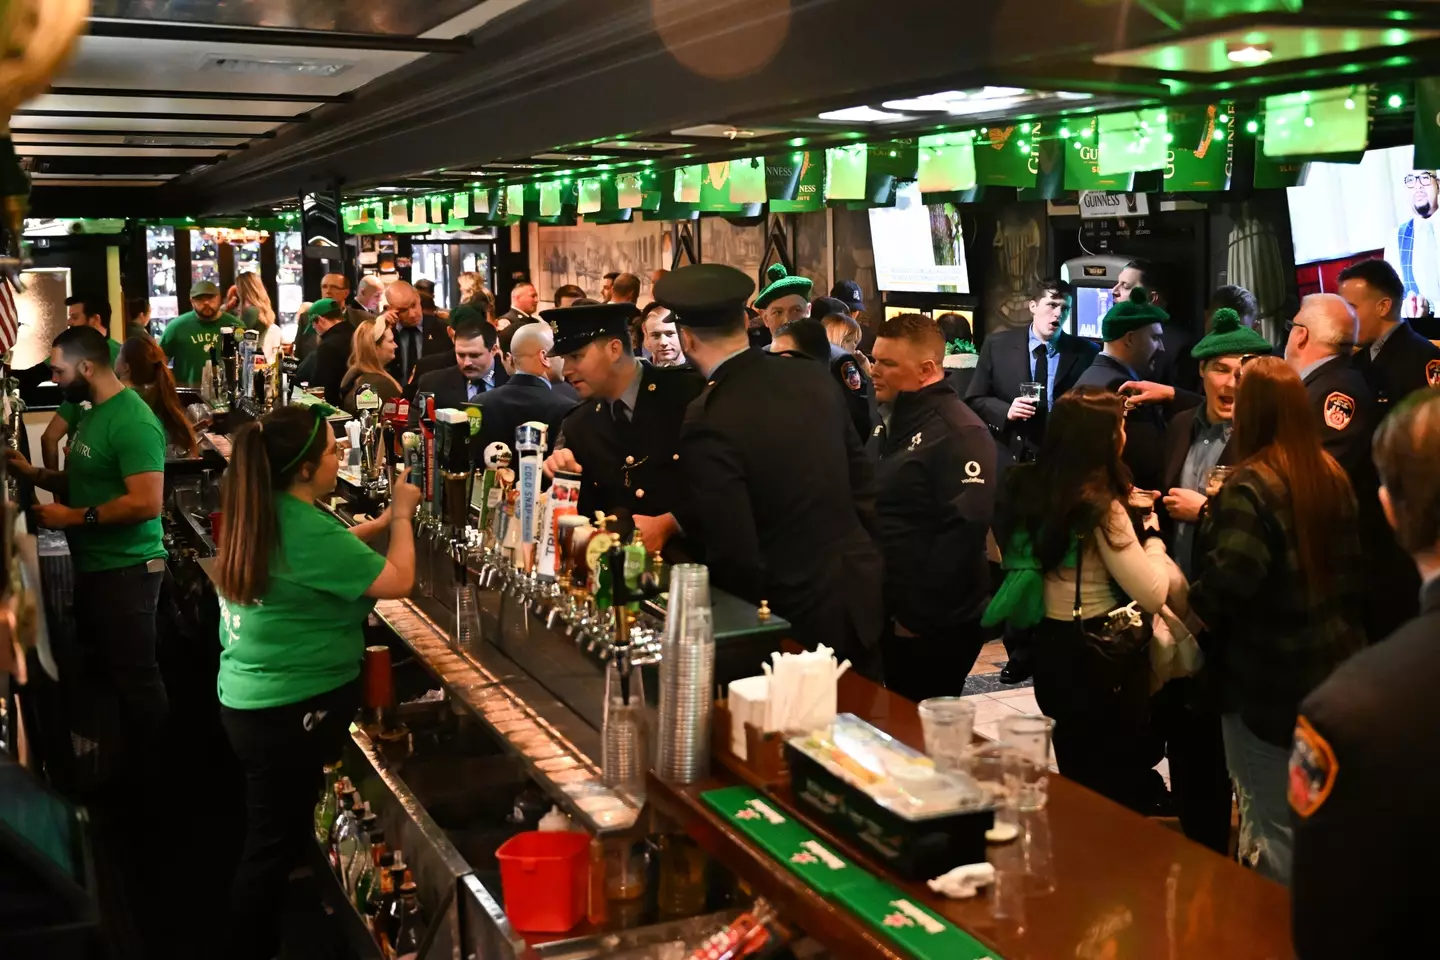 Be careful what you're ordering at the bar on St. Patricks Day.